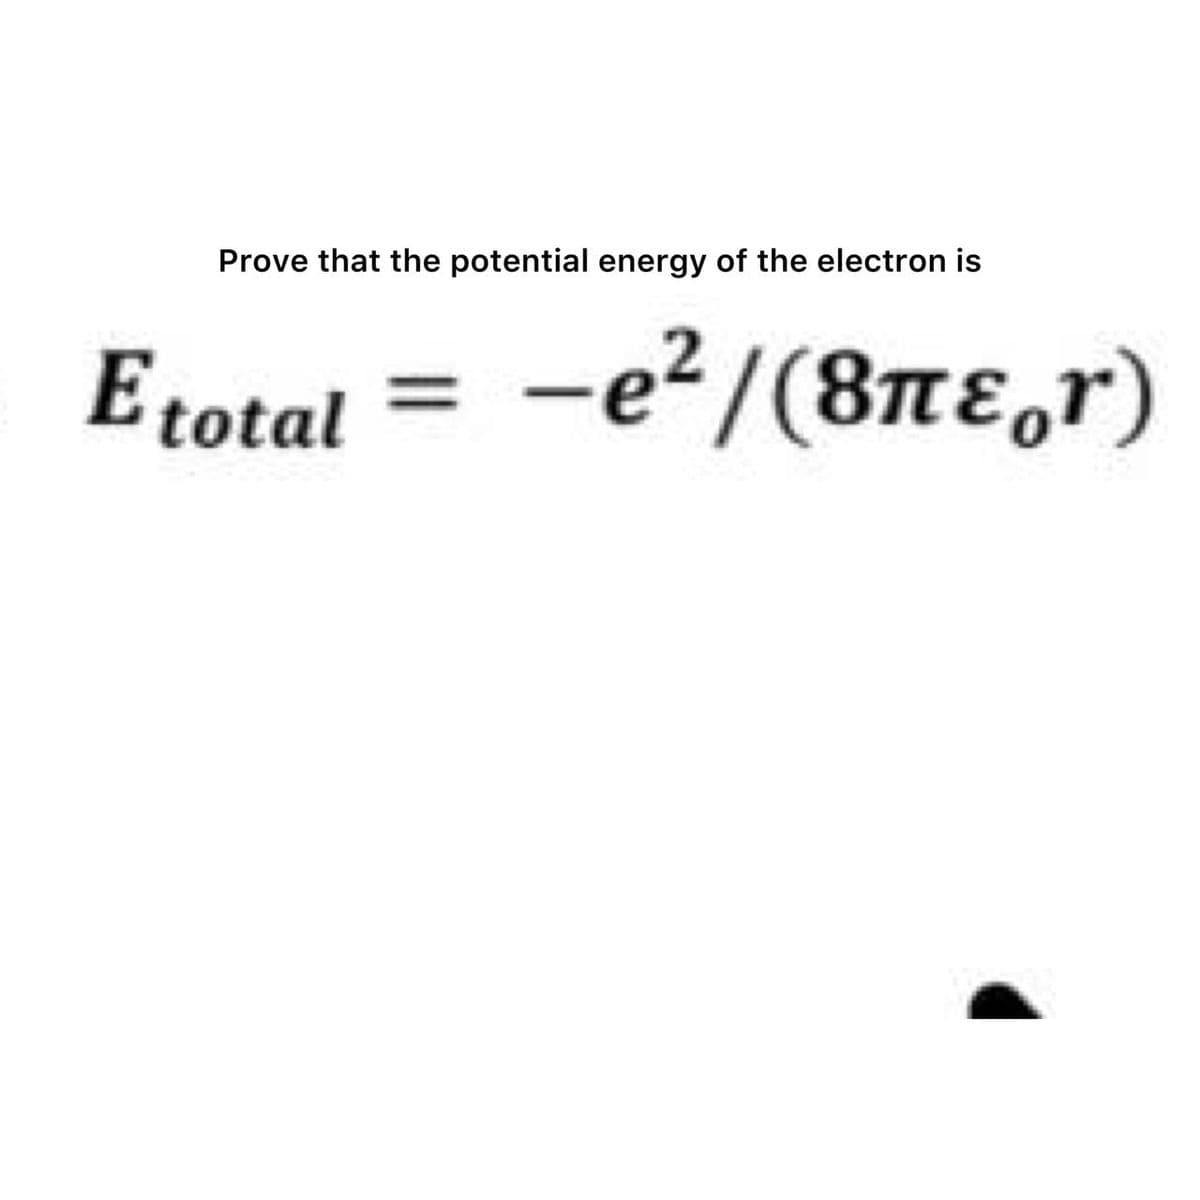 Prove that the potential energy of the electron is
Etotal
-e?/ (8πεoΥ)
